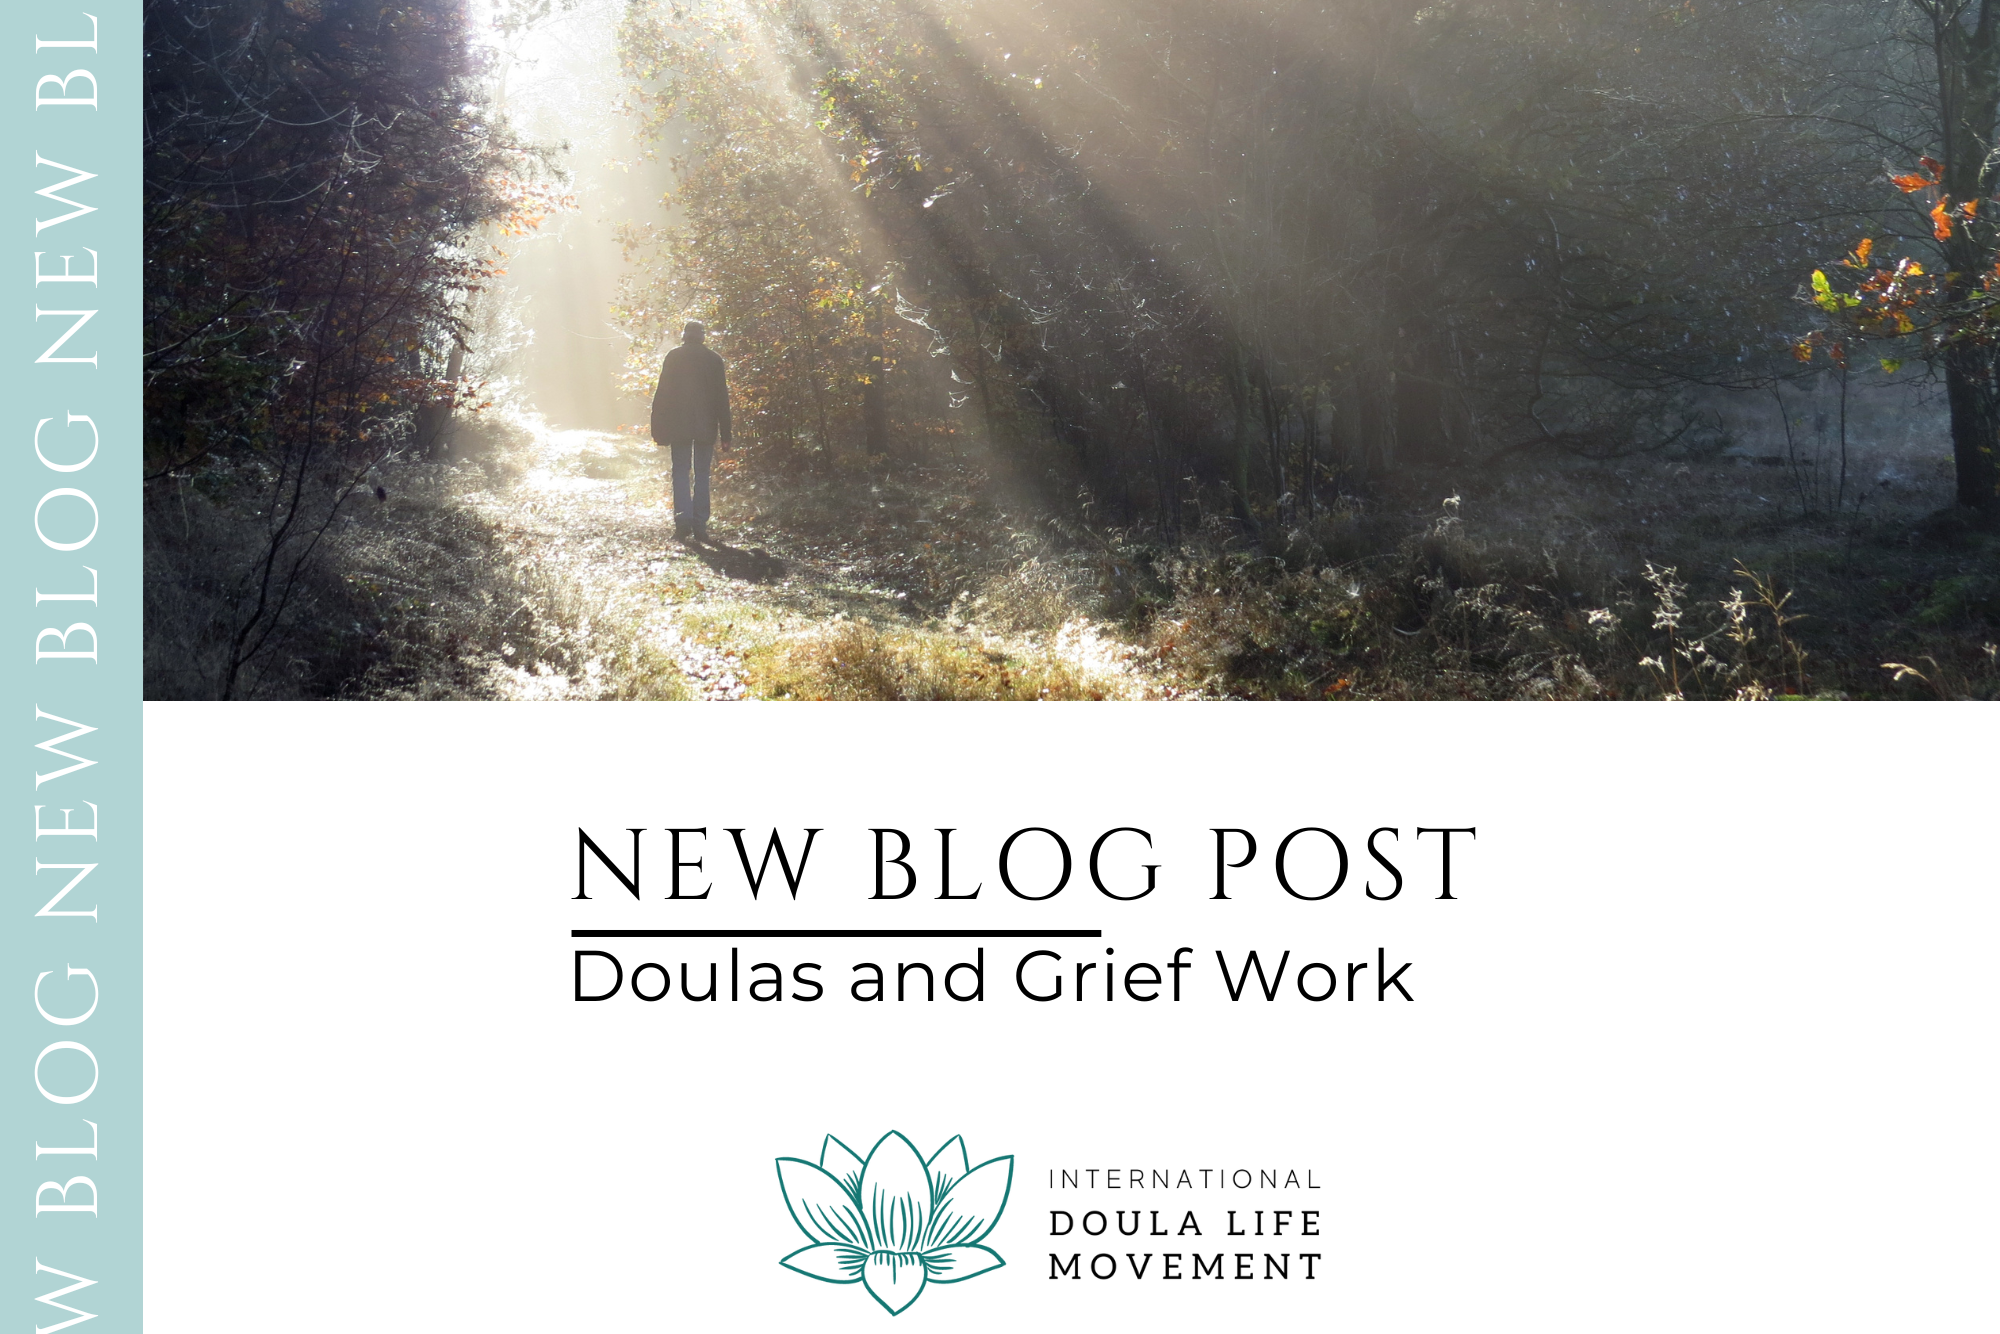 Doulas and Grief Work